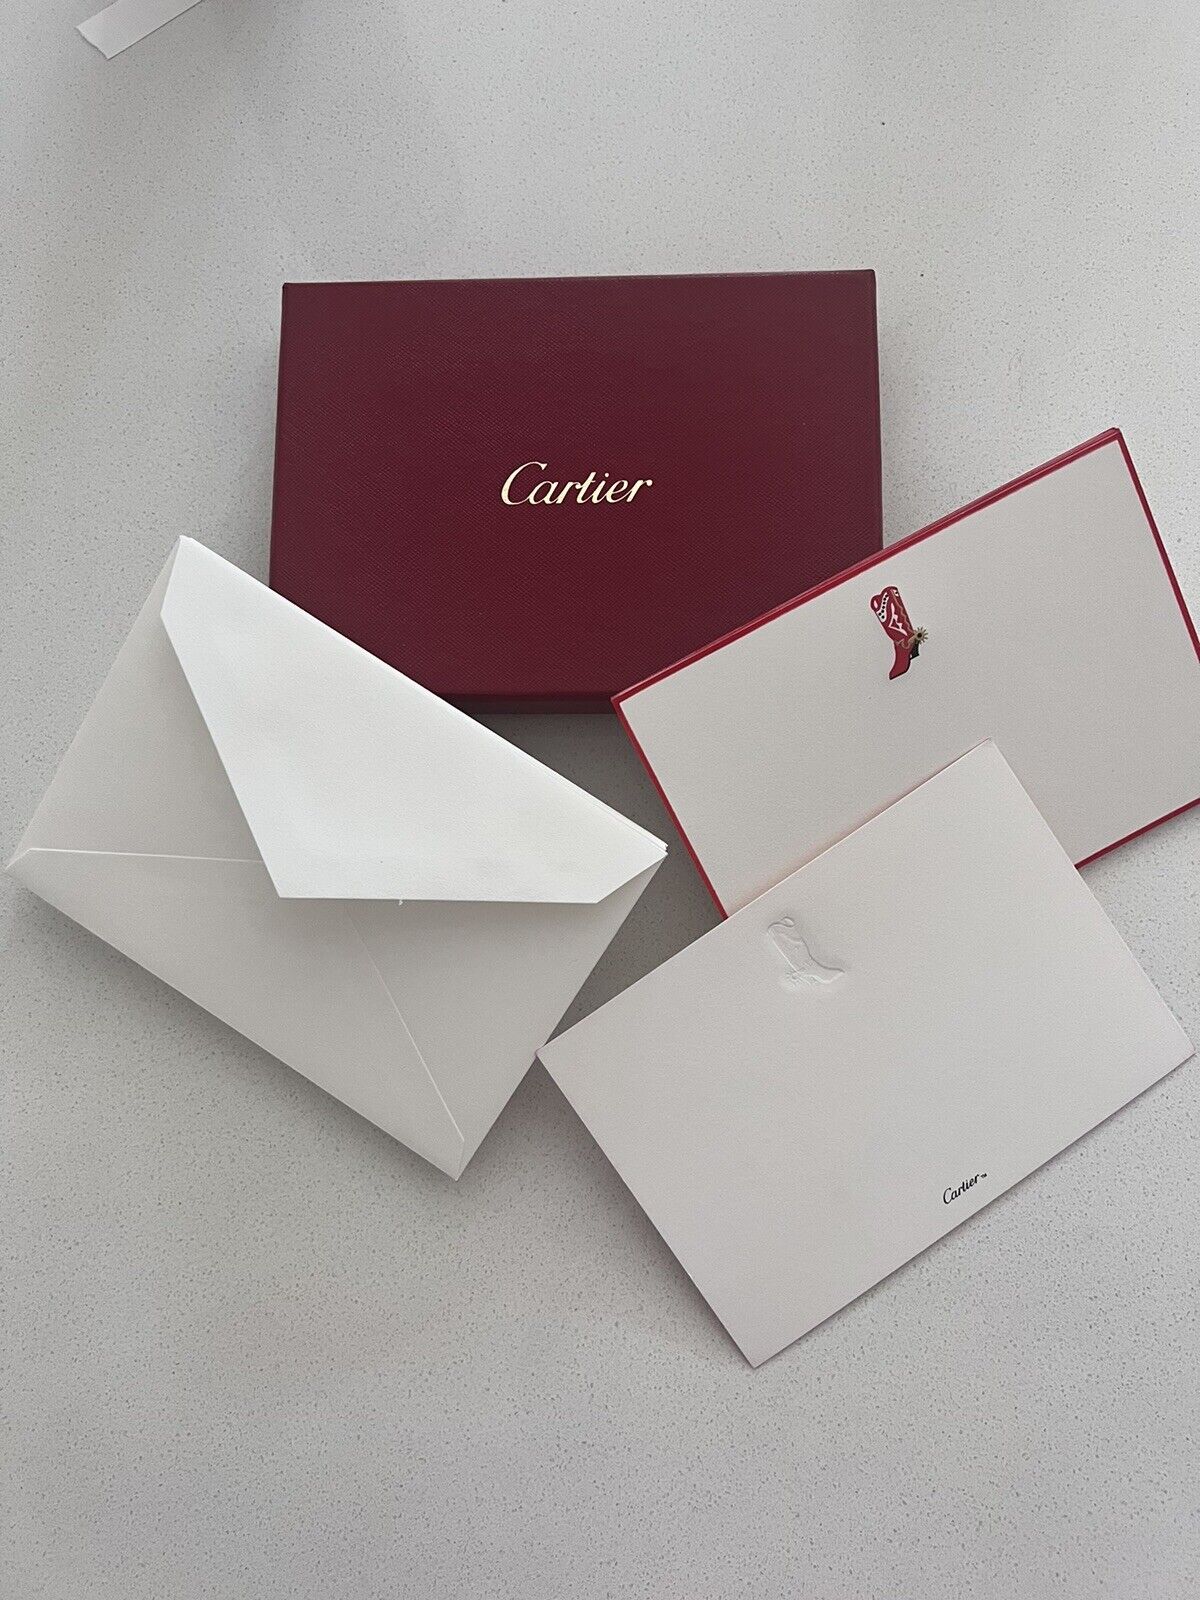 AUTHENTIC Cartier 8 Stationery Card Letter Notes 9 Envelopes In Original Box